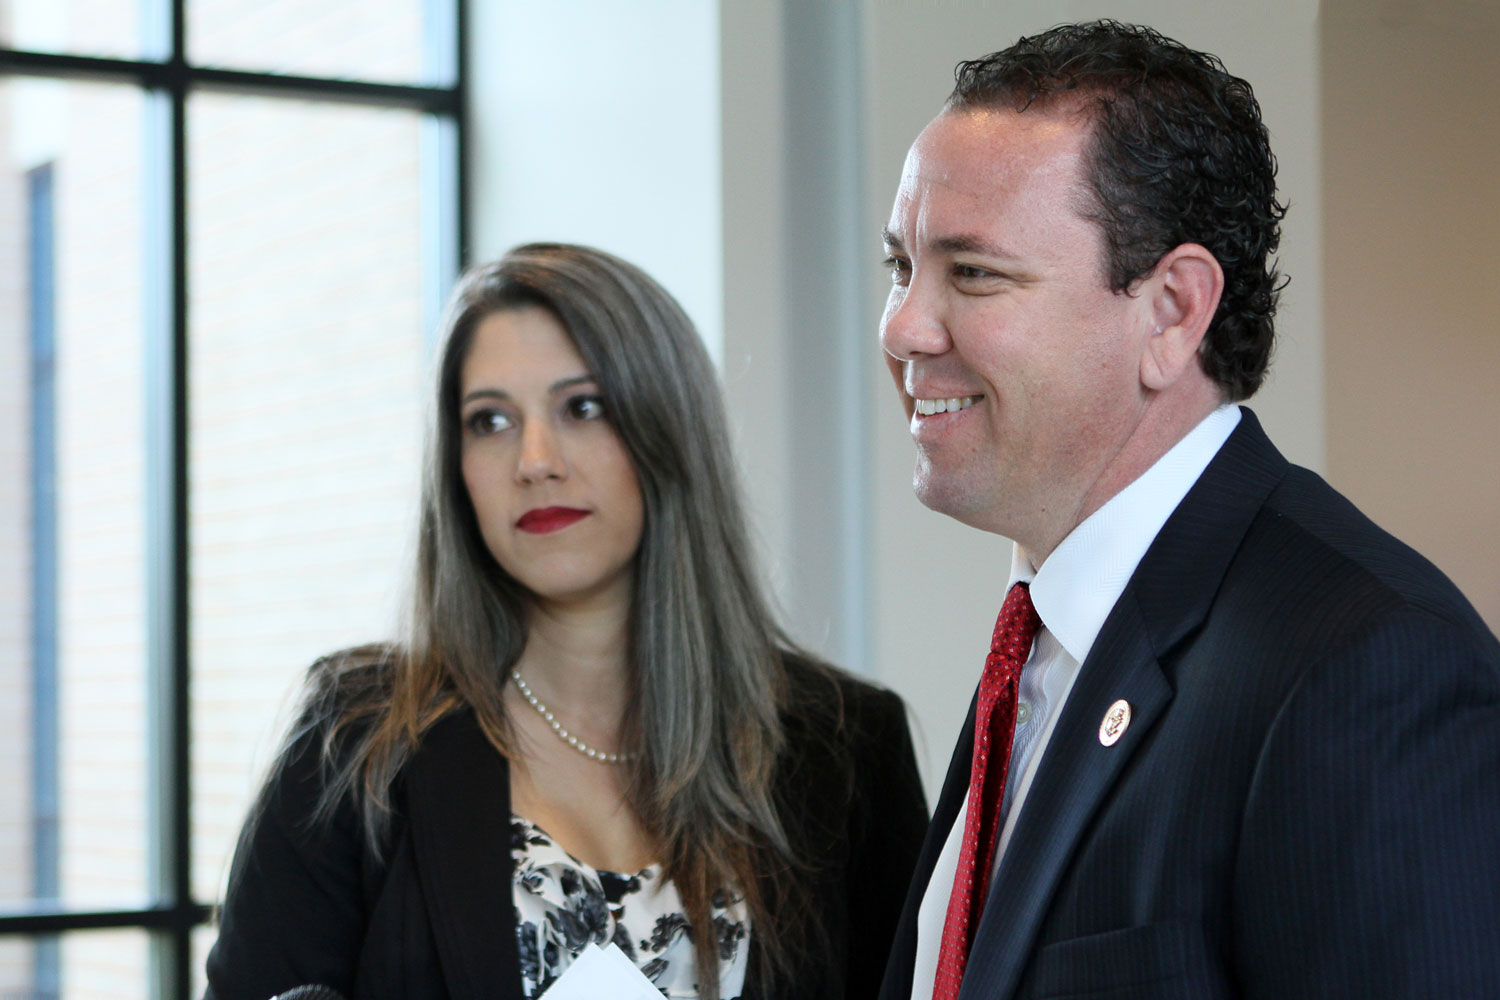 Republican Rep. Vance McAllister, right, and his wife Kelly, check in at Monroe Regional Airport on their way to Washington, in Monroe, La., Monday, April 28, 2014. (Emerald Mcintyre—The News-Star/AP)